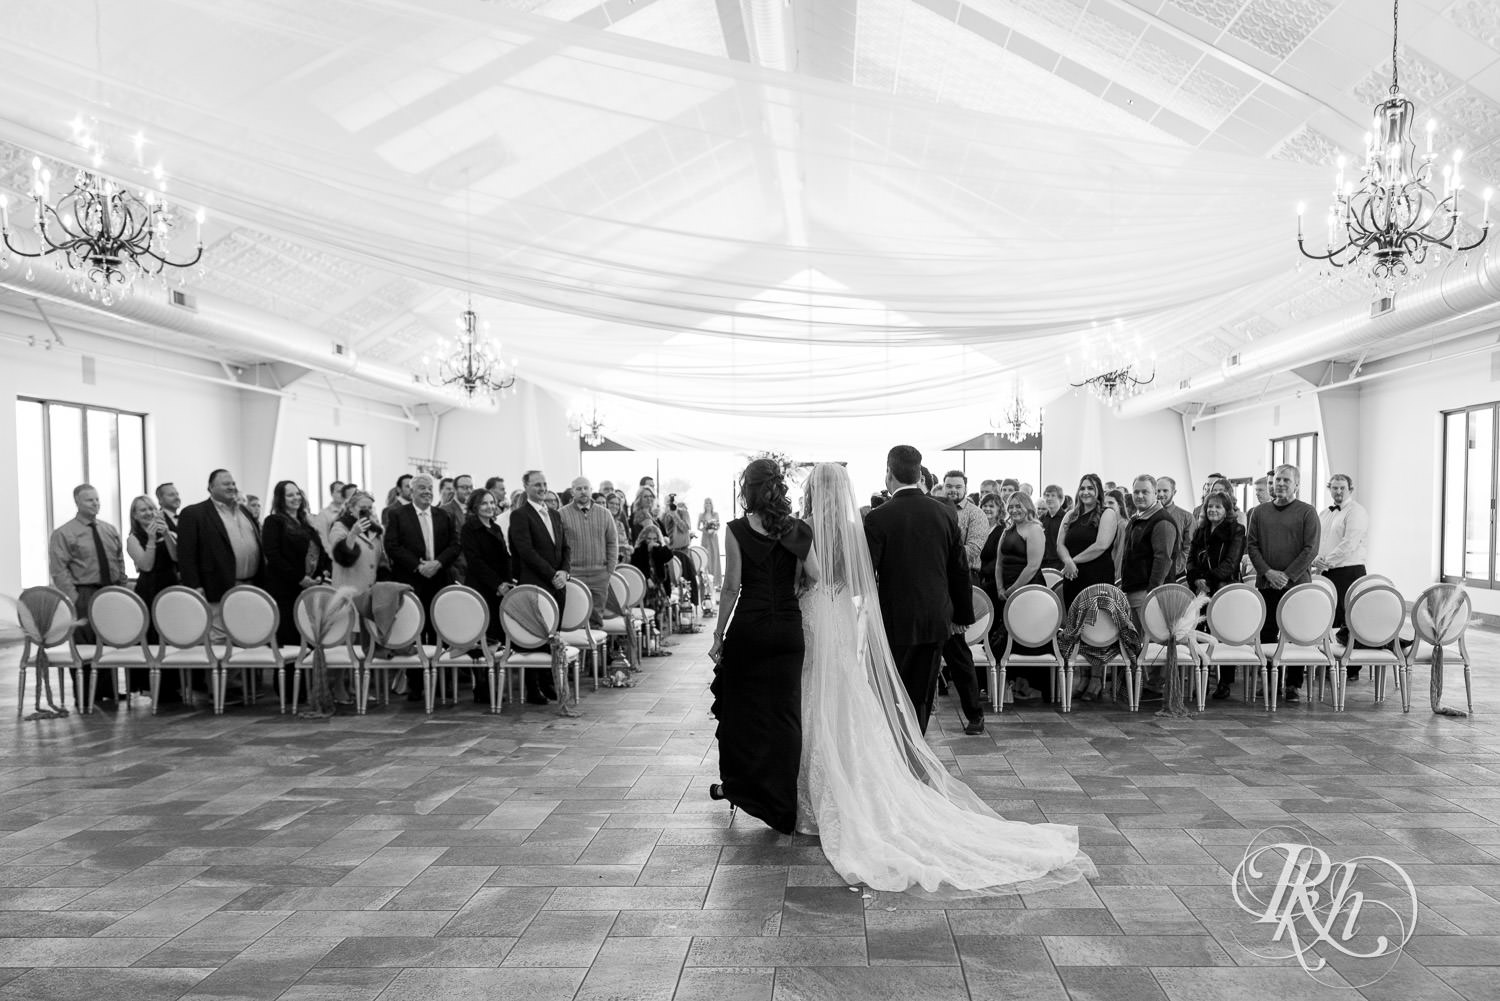 Bride walks down the aisle with parents during wedding ceremony at Bavaria Downs in Chaska, Minnesota.